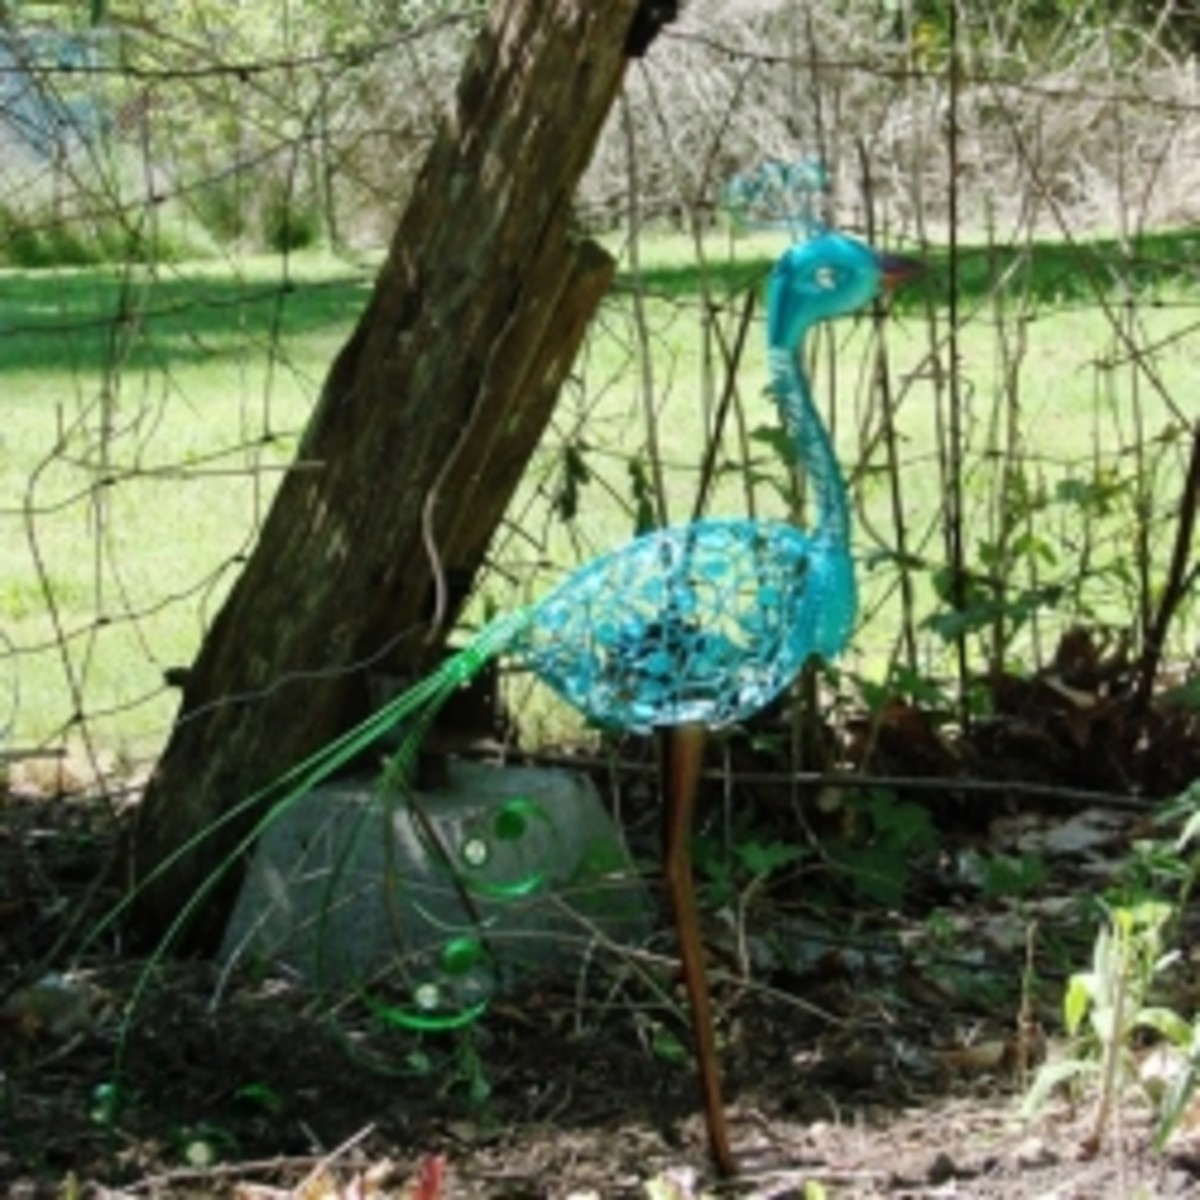 There's A Peacock In My Garden!